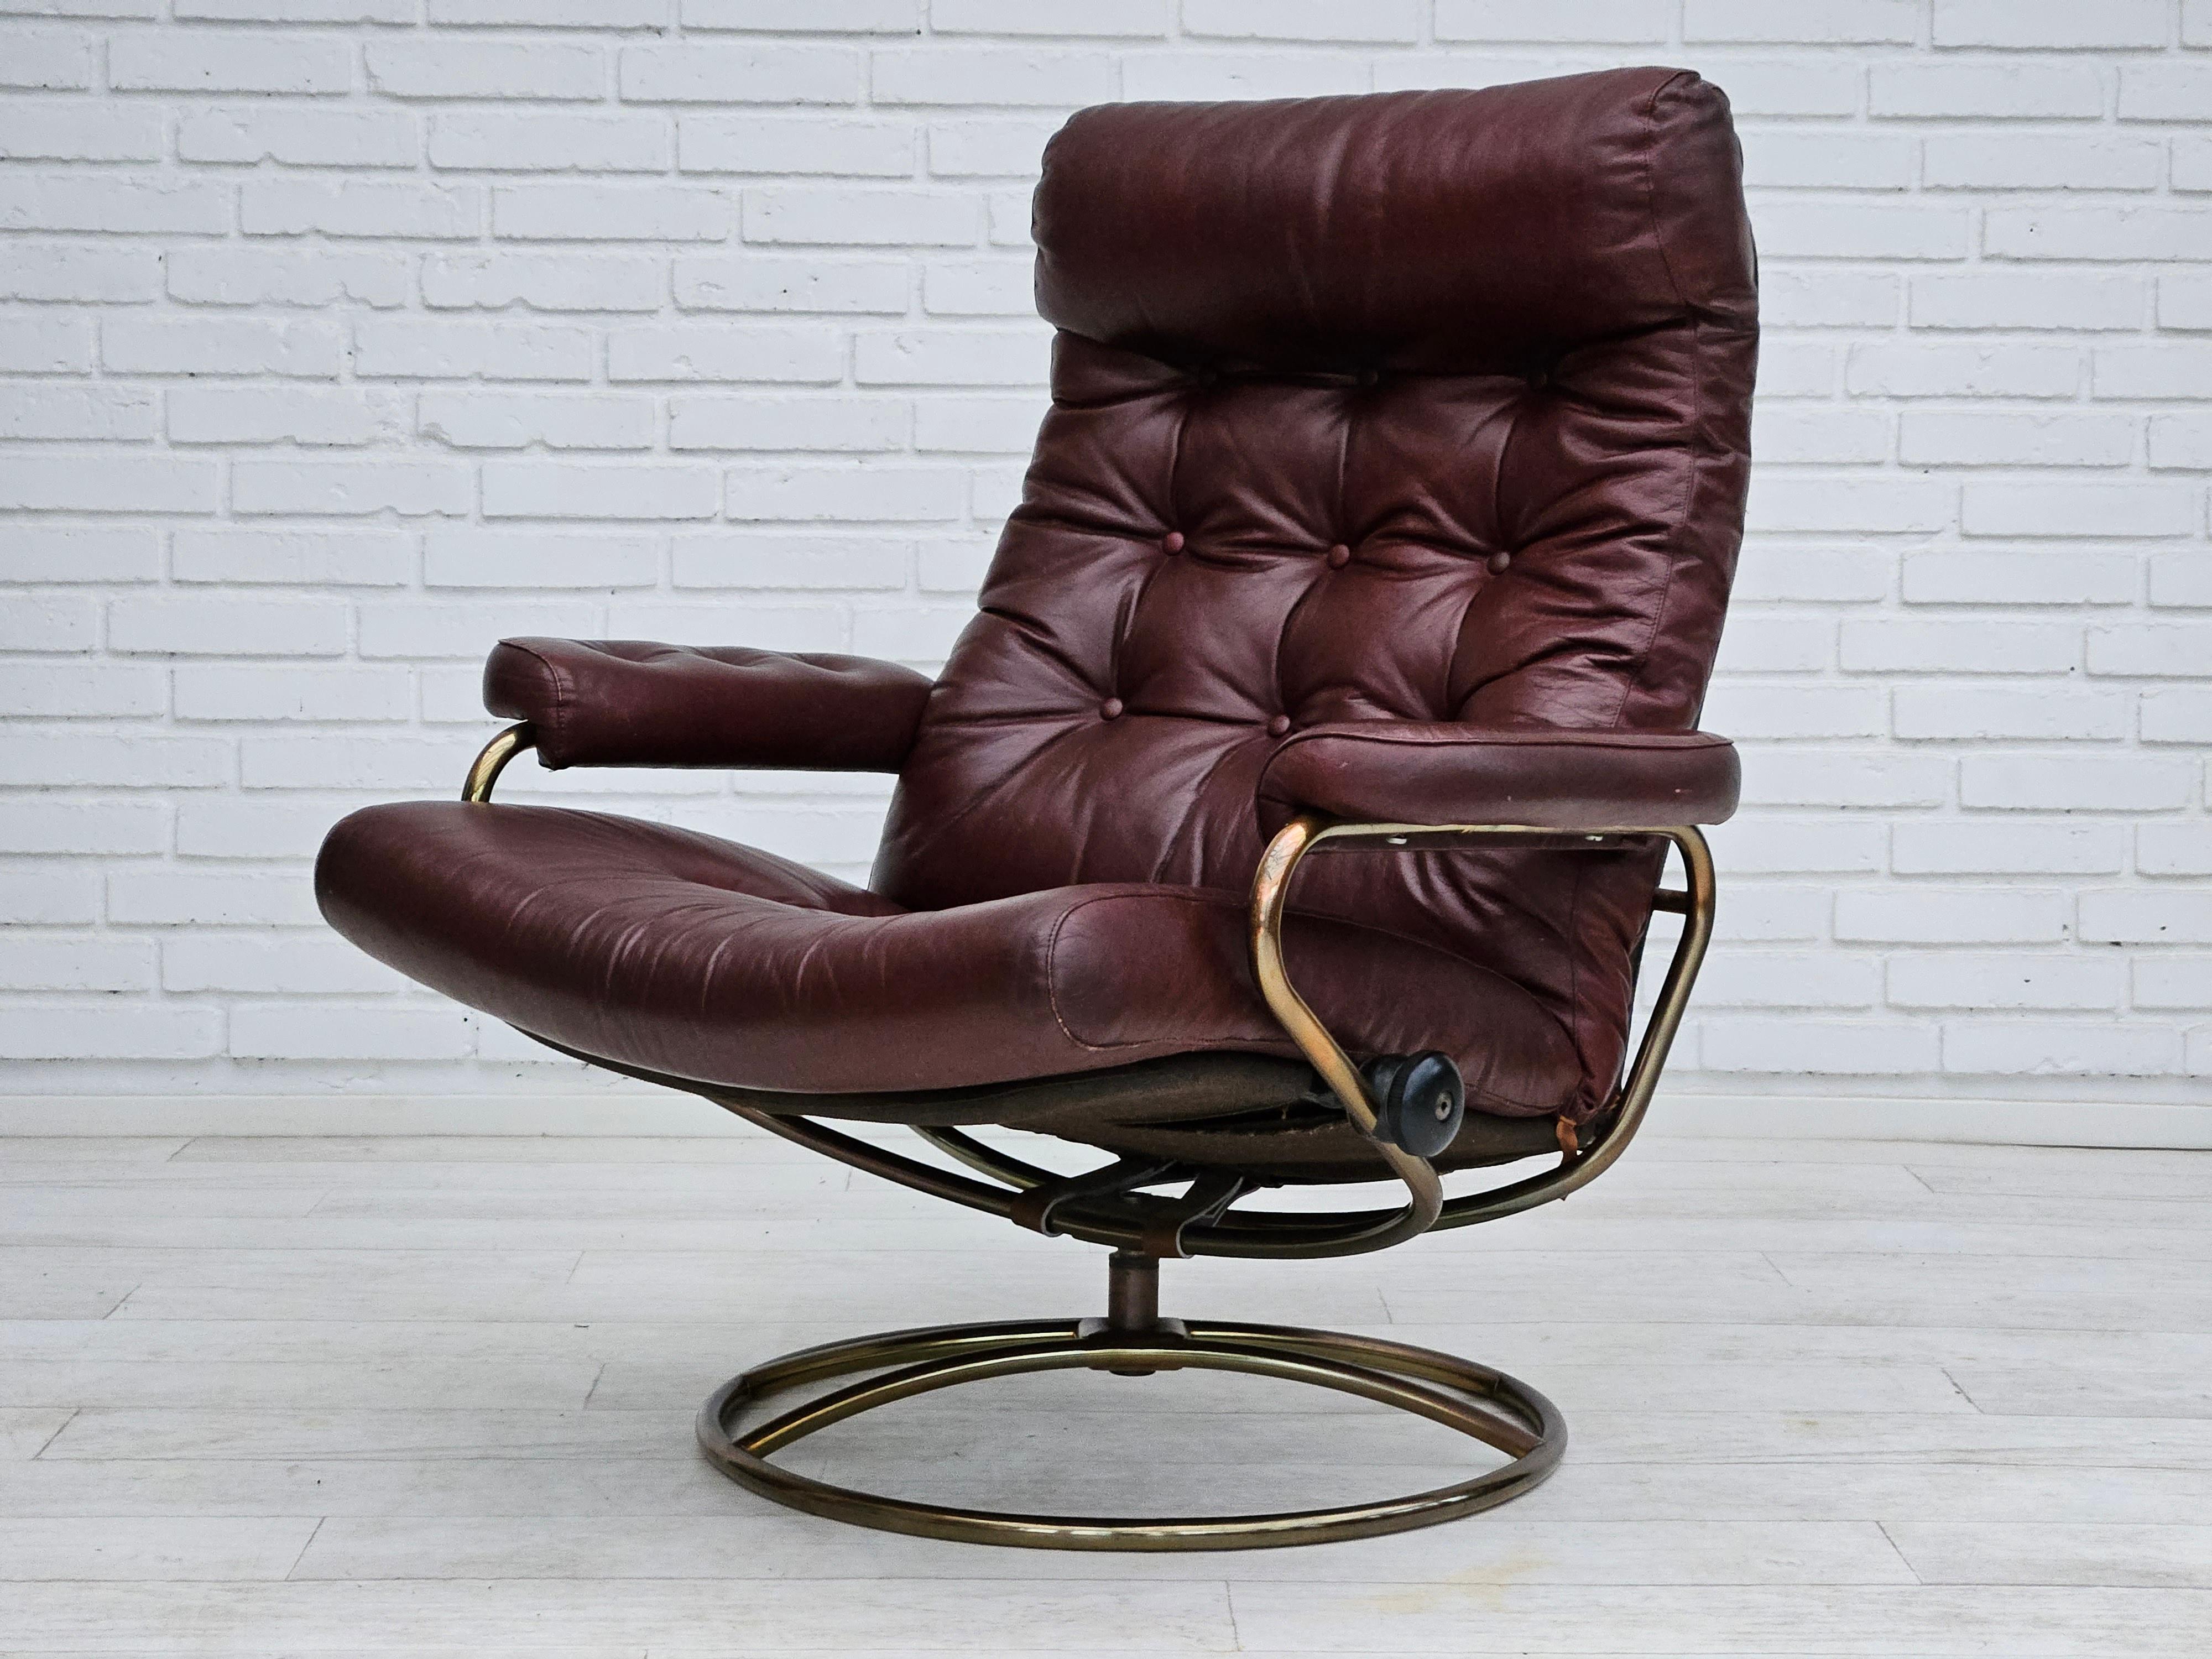 1970s, Norwegian relax swivel chair by Stressless, original very good condition. 10